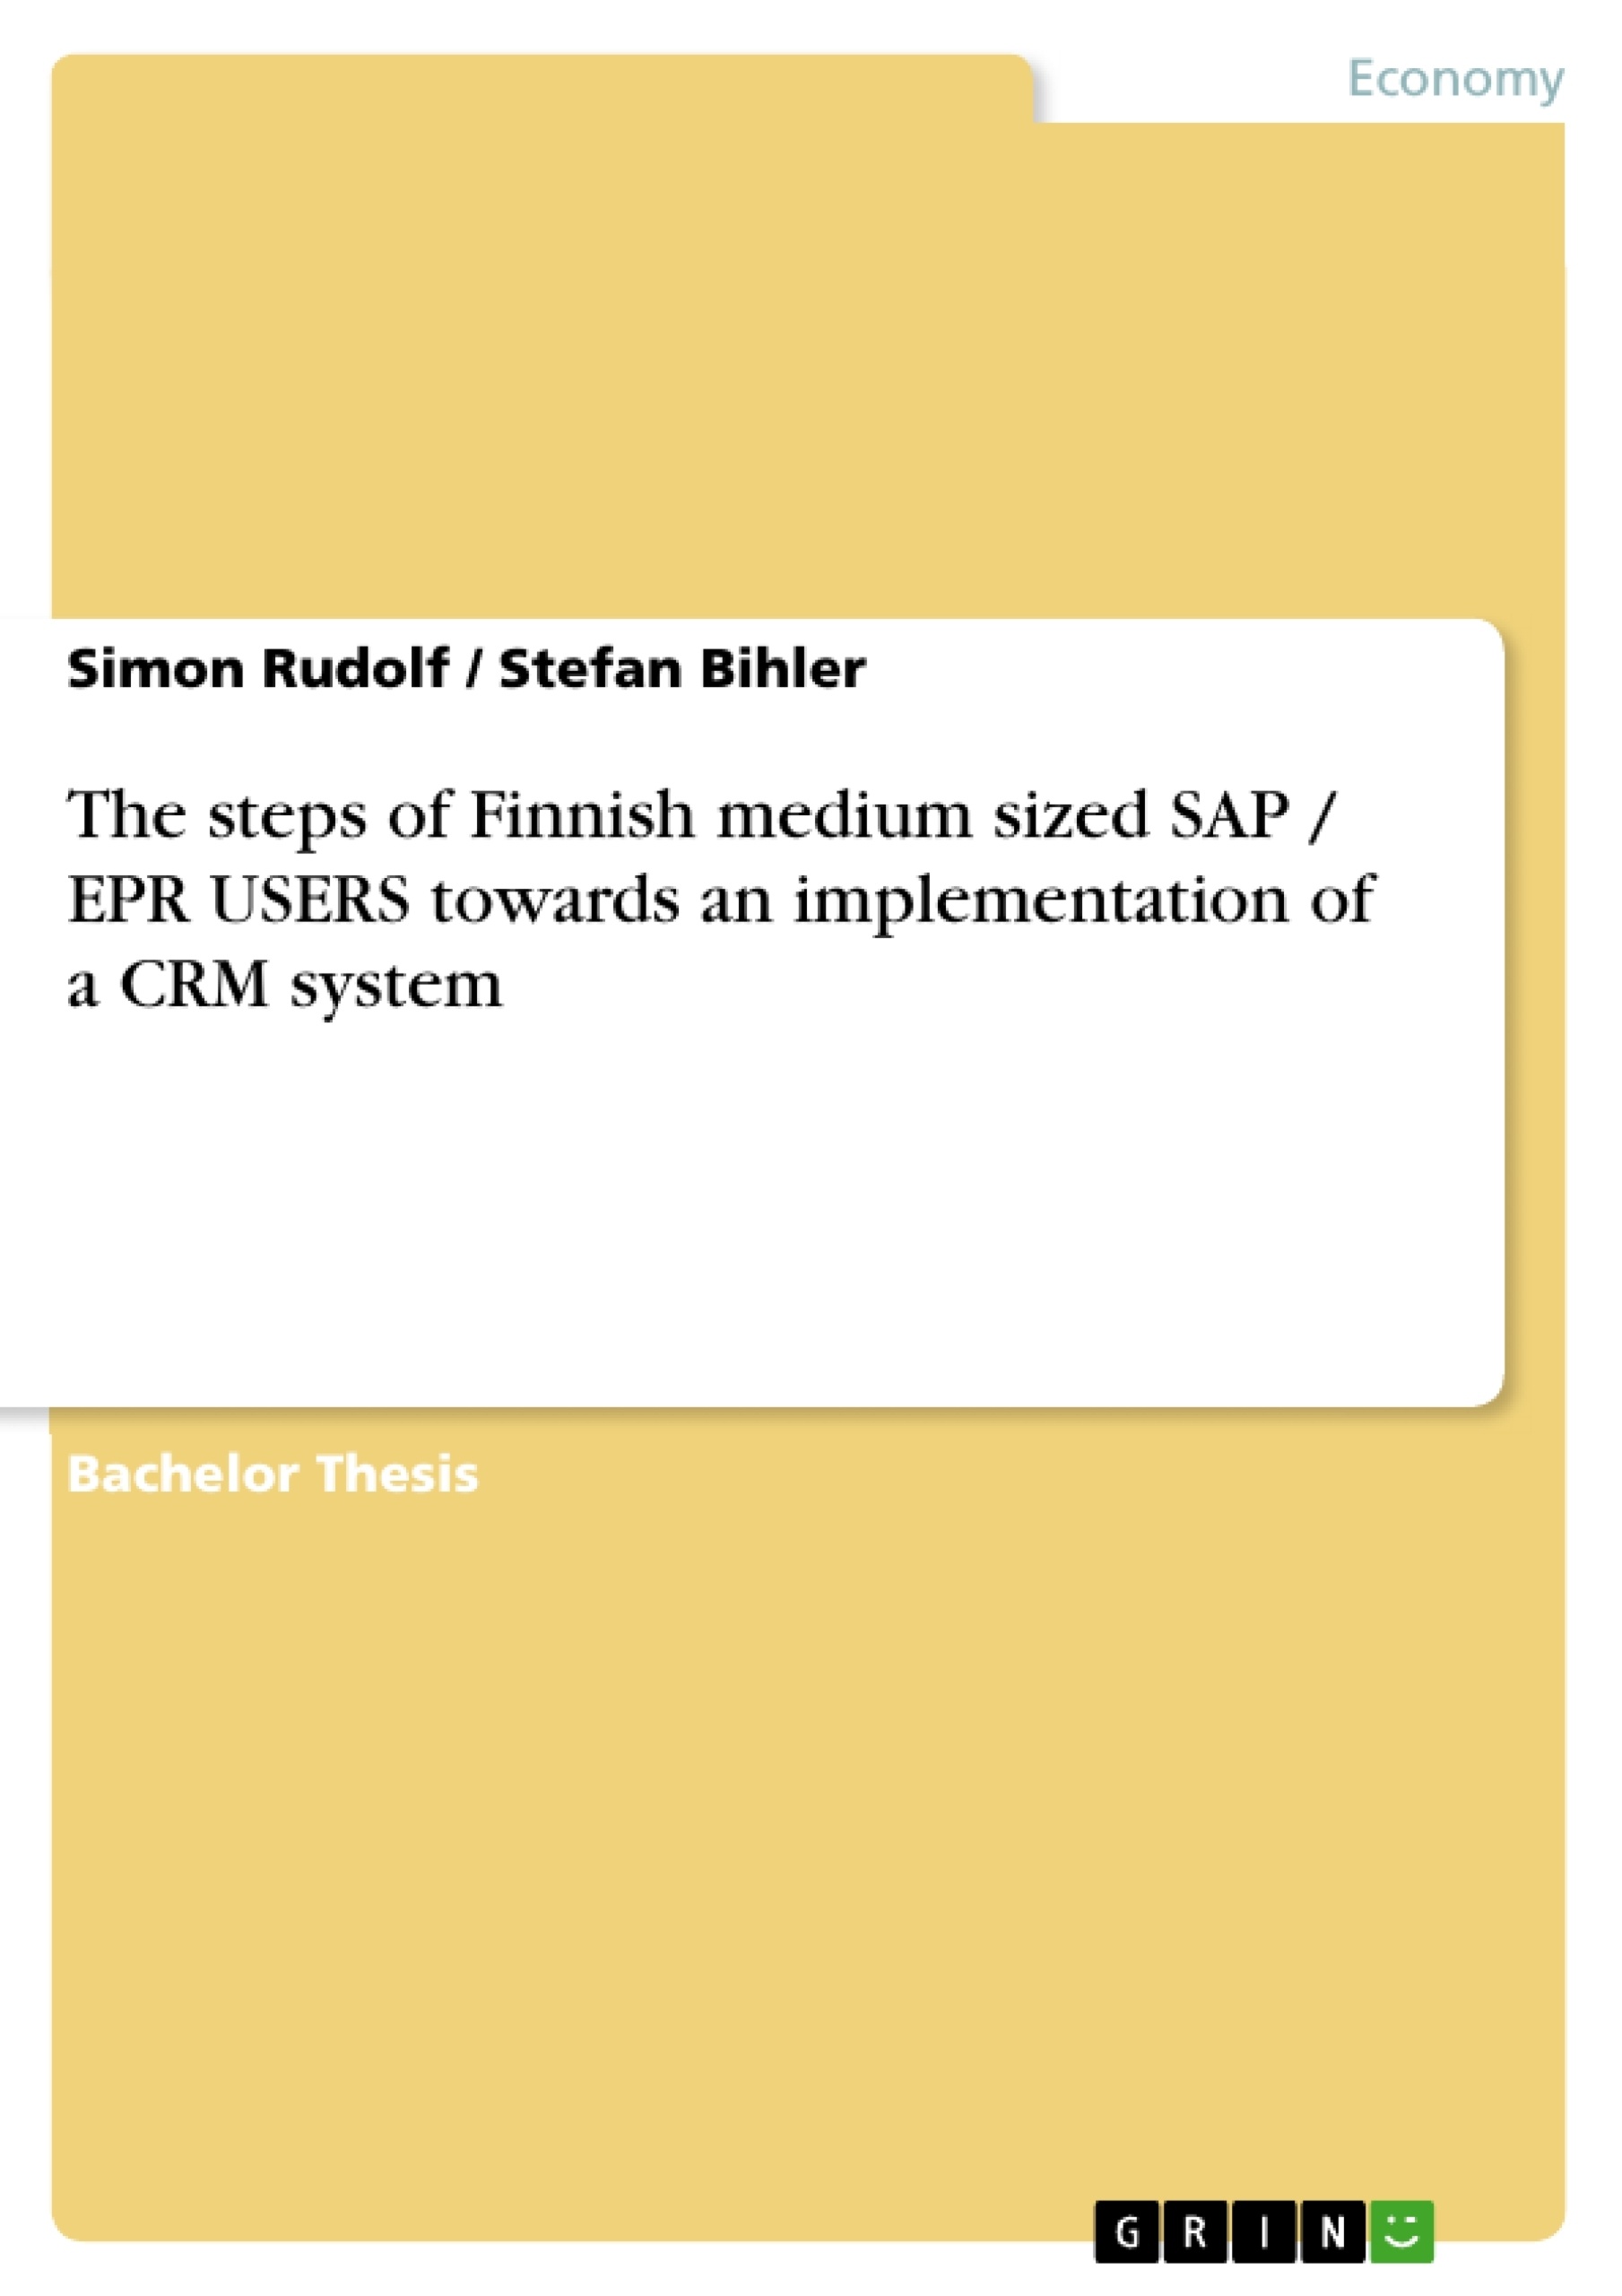 Título: The steps of Finnish medium sized SAP / EPR USERS towards an implementation of a CRM system 